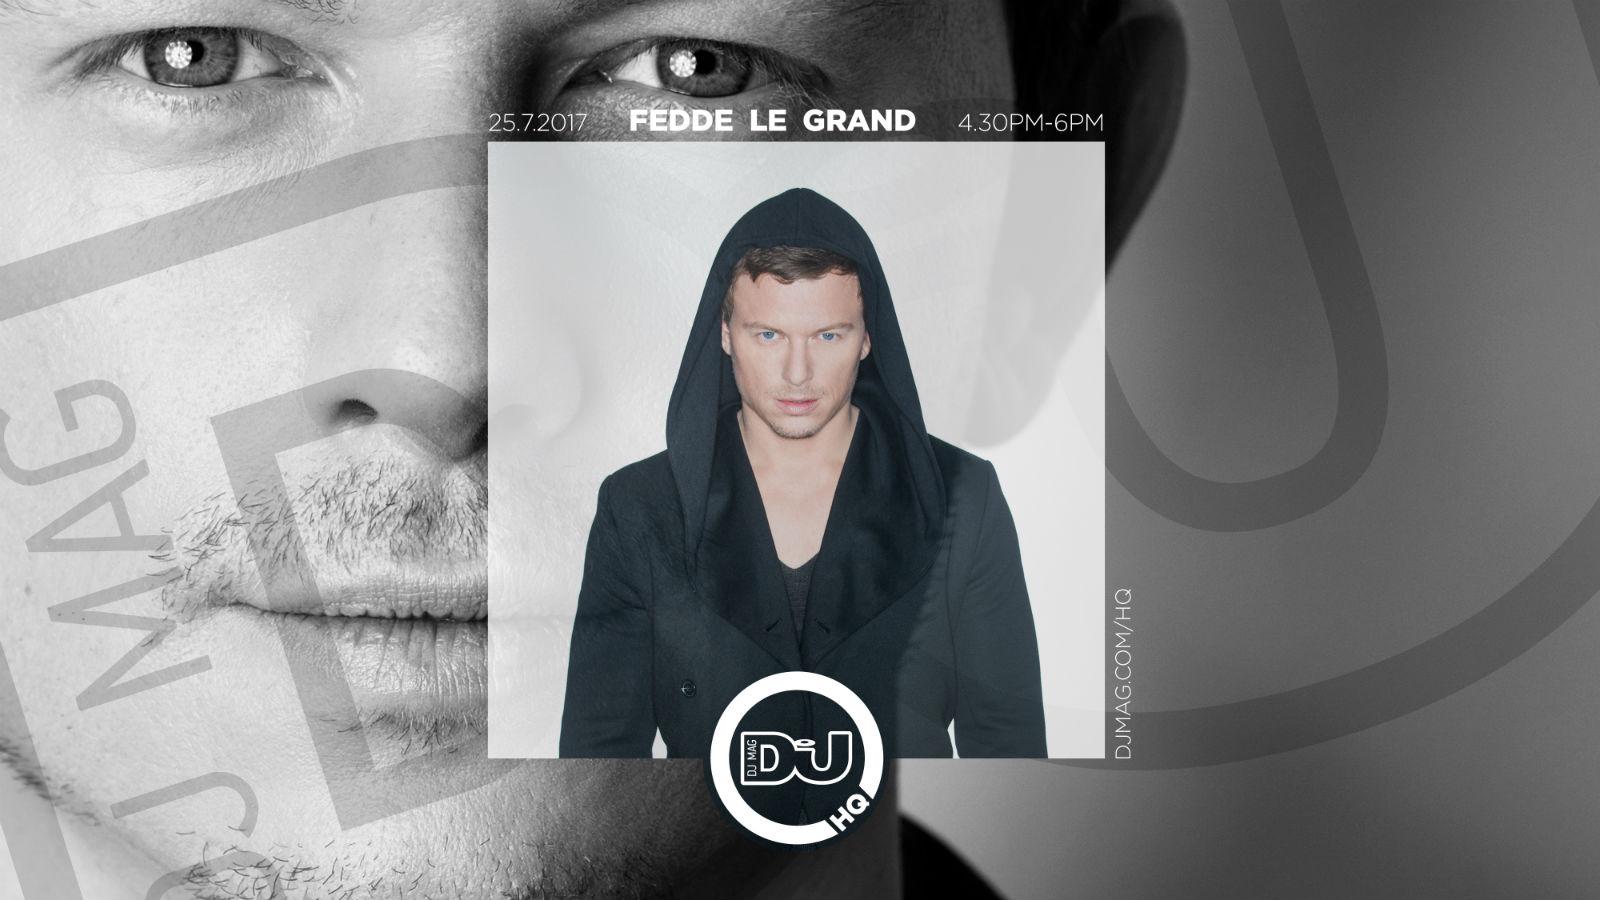 WATCH FEDDE LE GRAND HIT #DJMAGHQ TODAY